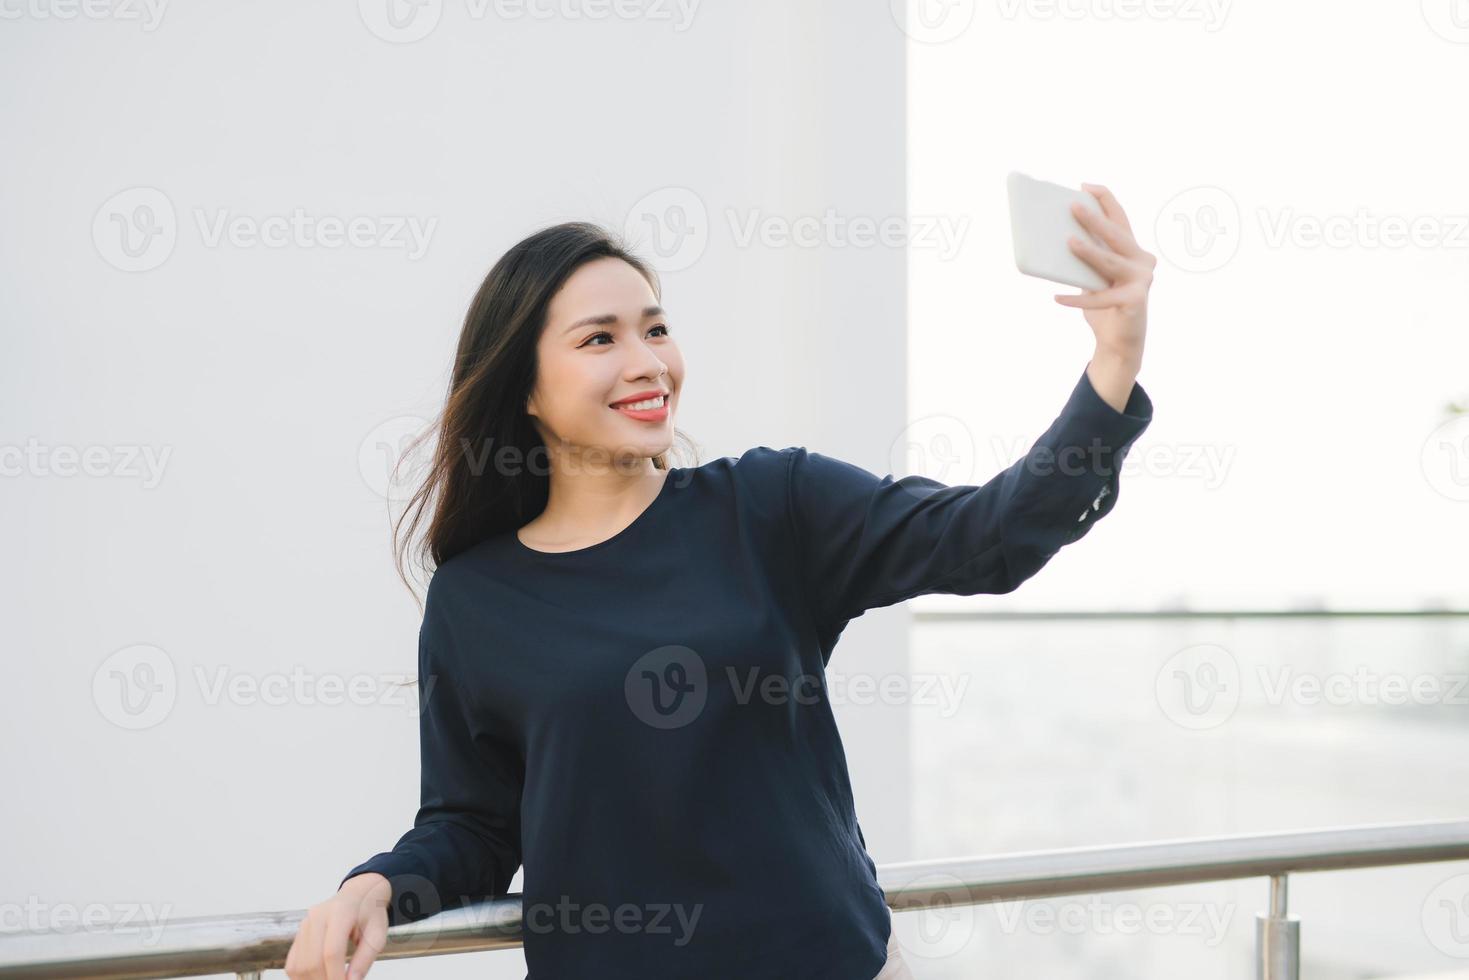 Relaxed and cheerful. Work and vacation. Outdoor portrait of happy young woman using smartphone, doing selfie photo and looking at you on terrace with beautiful city view.